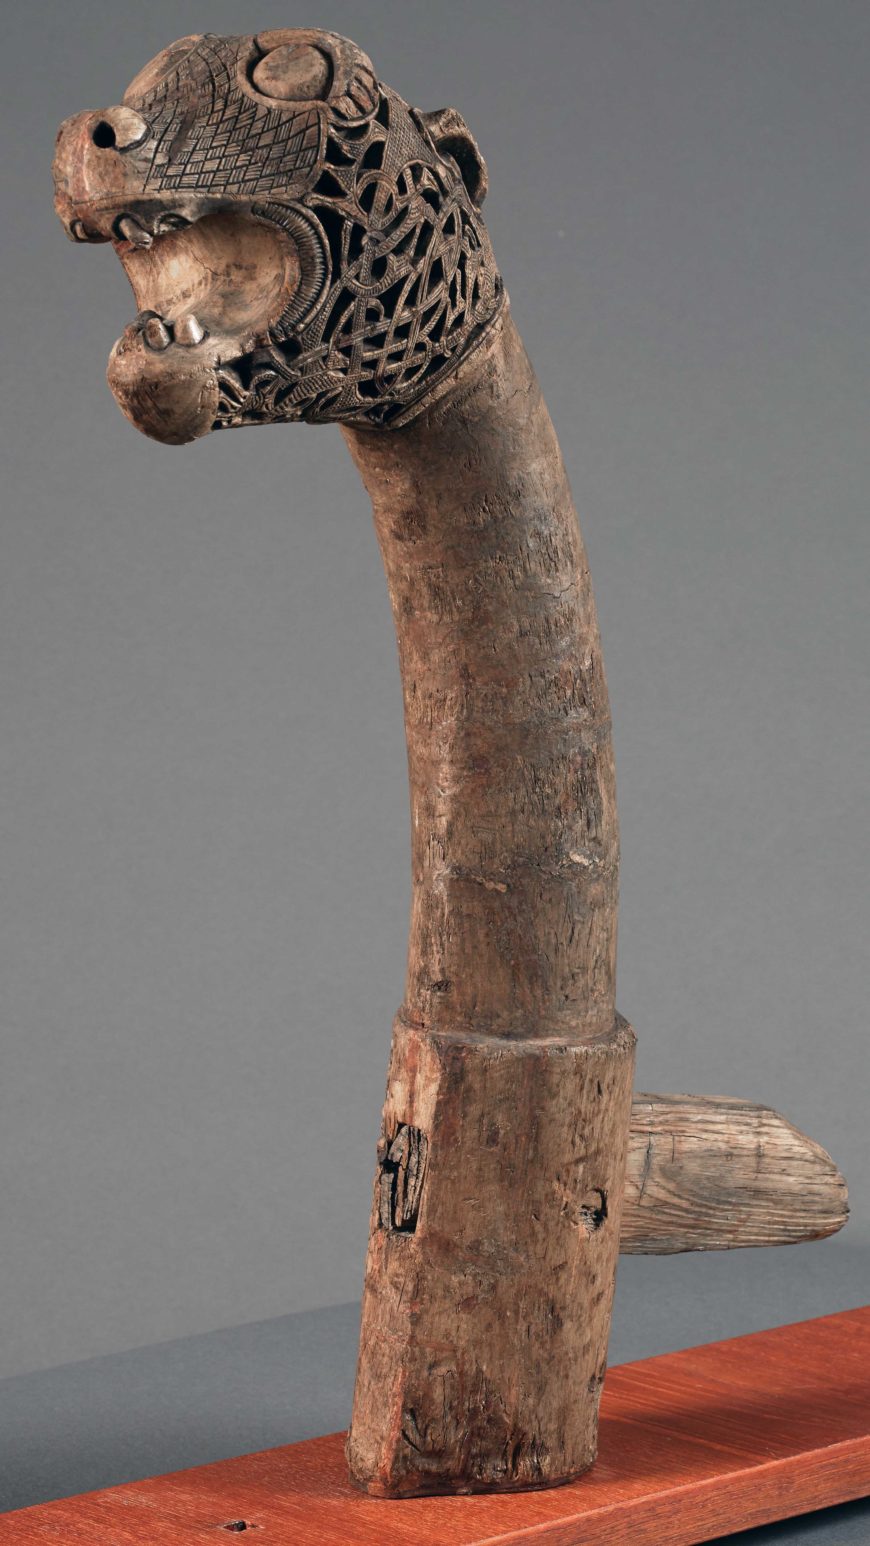 The “Academician’s” animal head post from the Oseberg ship burial, the Museum of Cultural History, University of Oslo